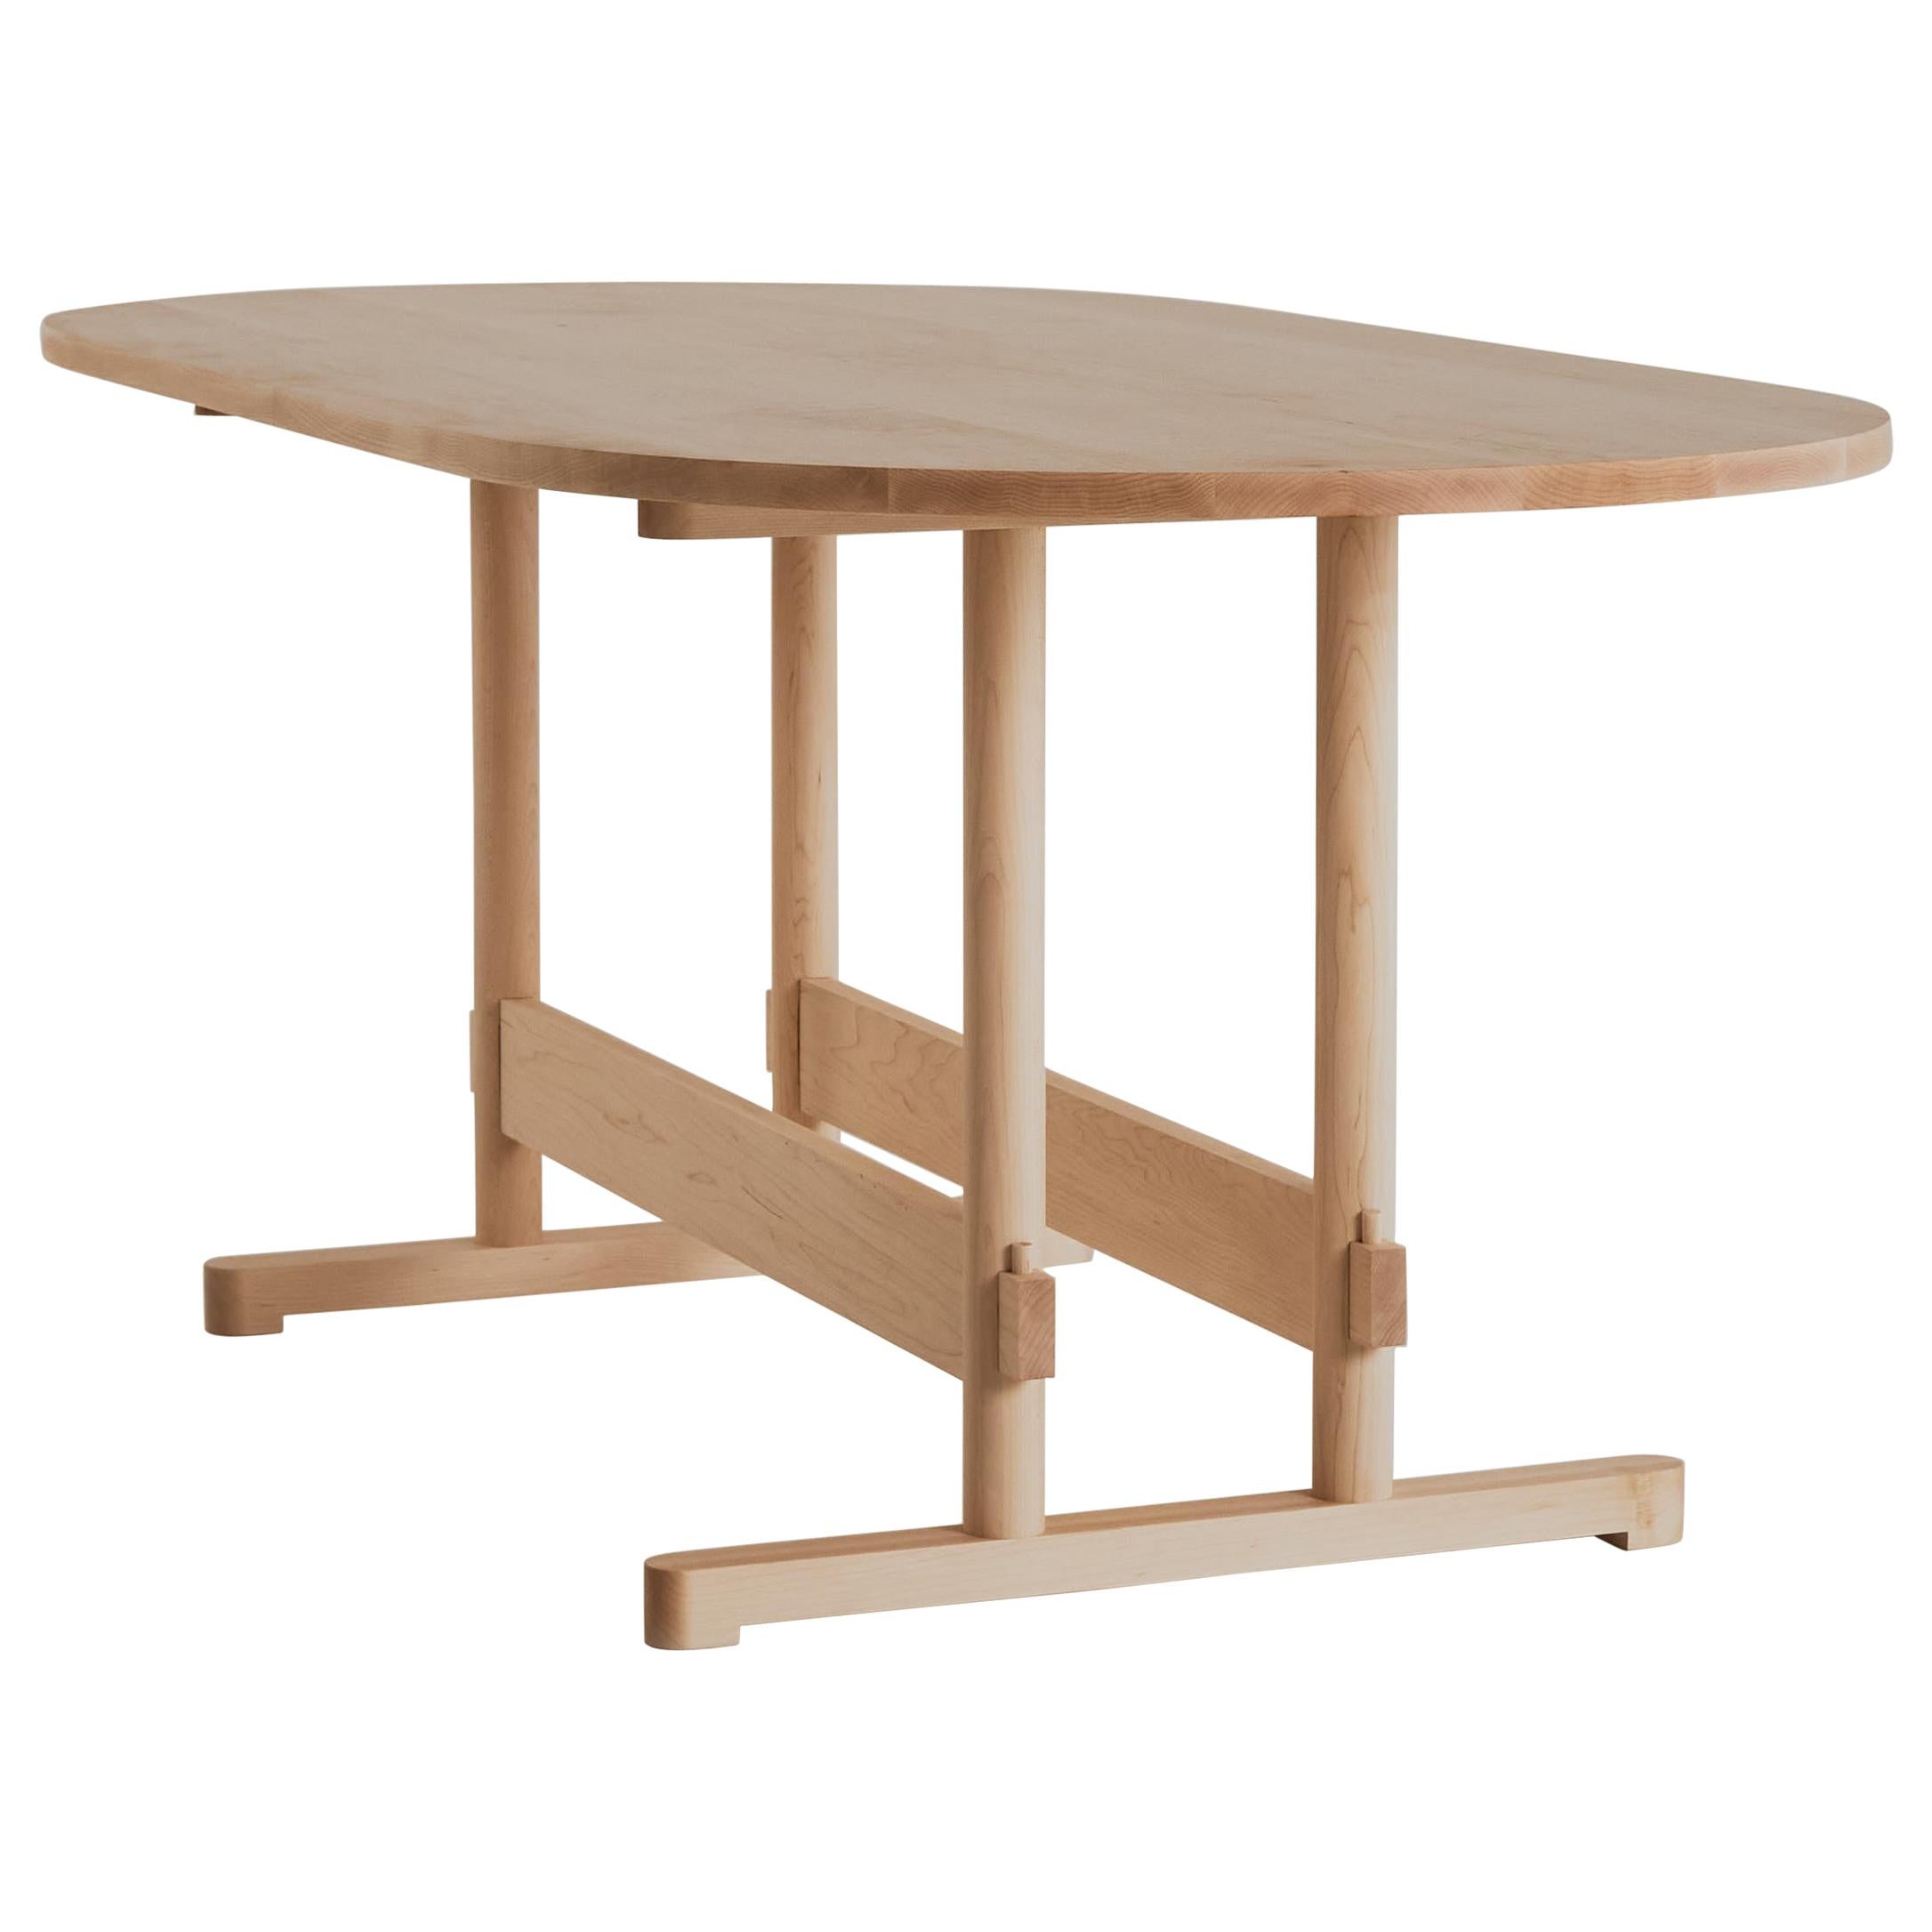 Dining Table No. 2 by Campagna Modern Minimal Shaker Inspired Wood Trestle Table